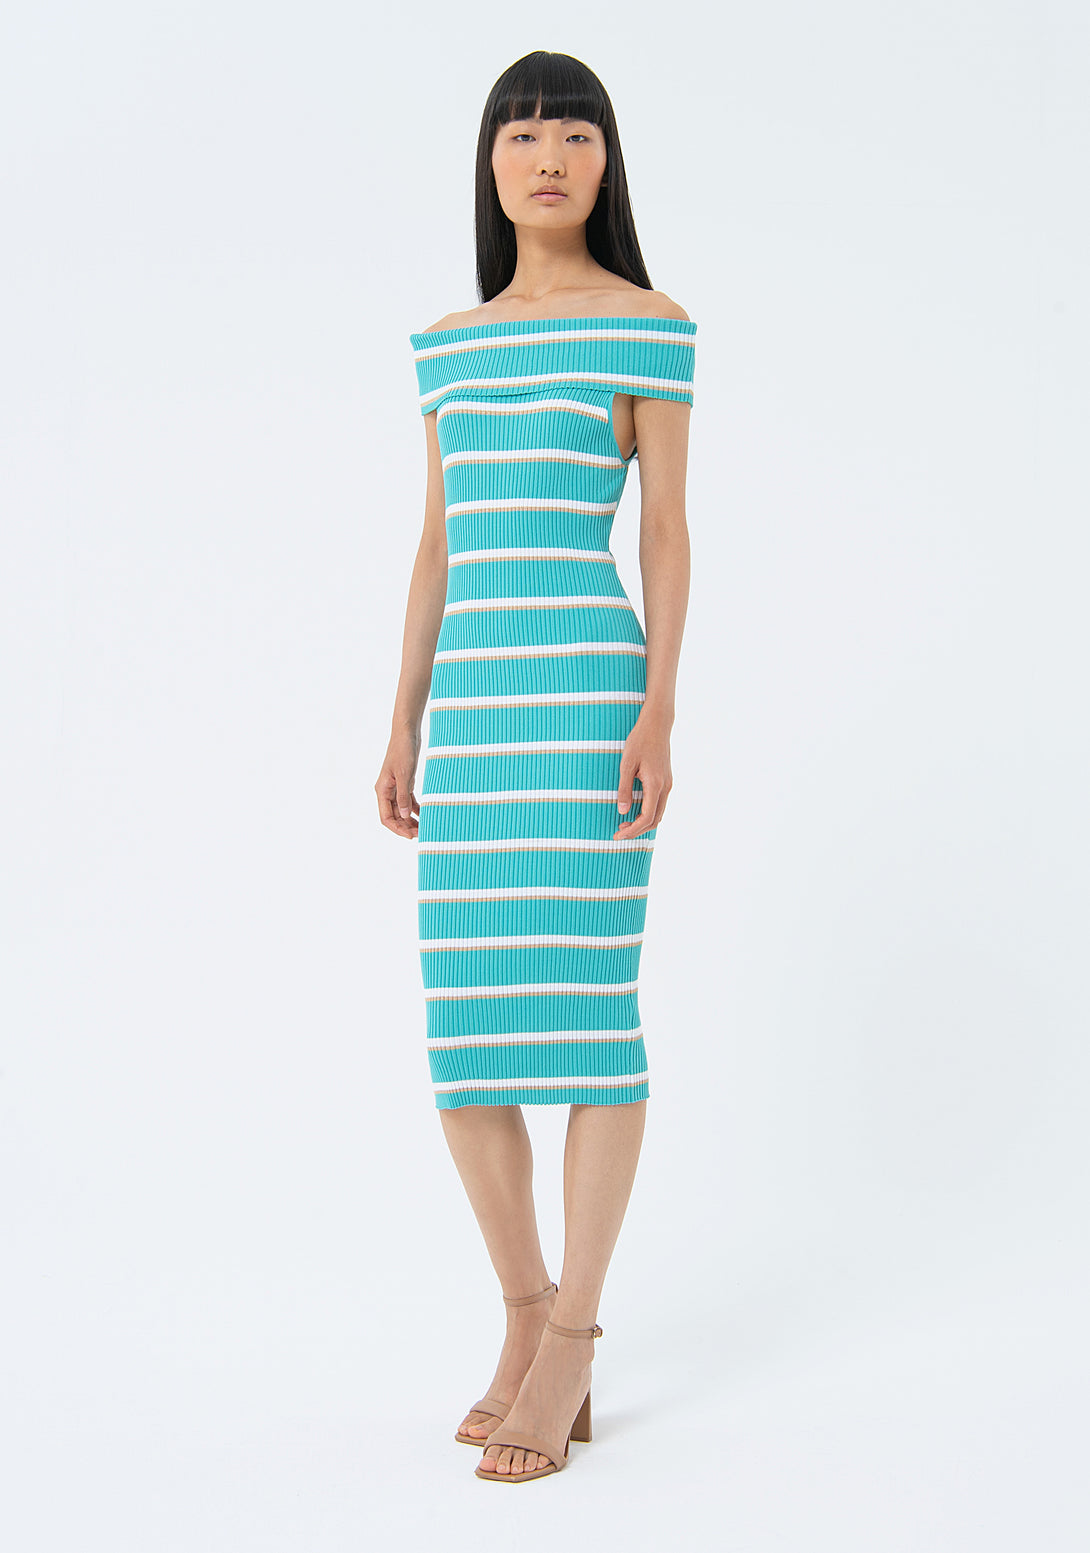 Knitted dress slim fit, middle length, with ribs and stripes Fracomina FS24SD5001K420N8-S52-1